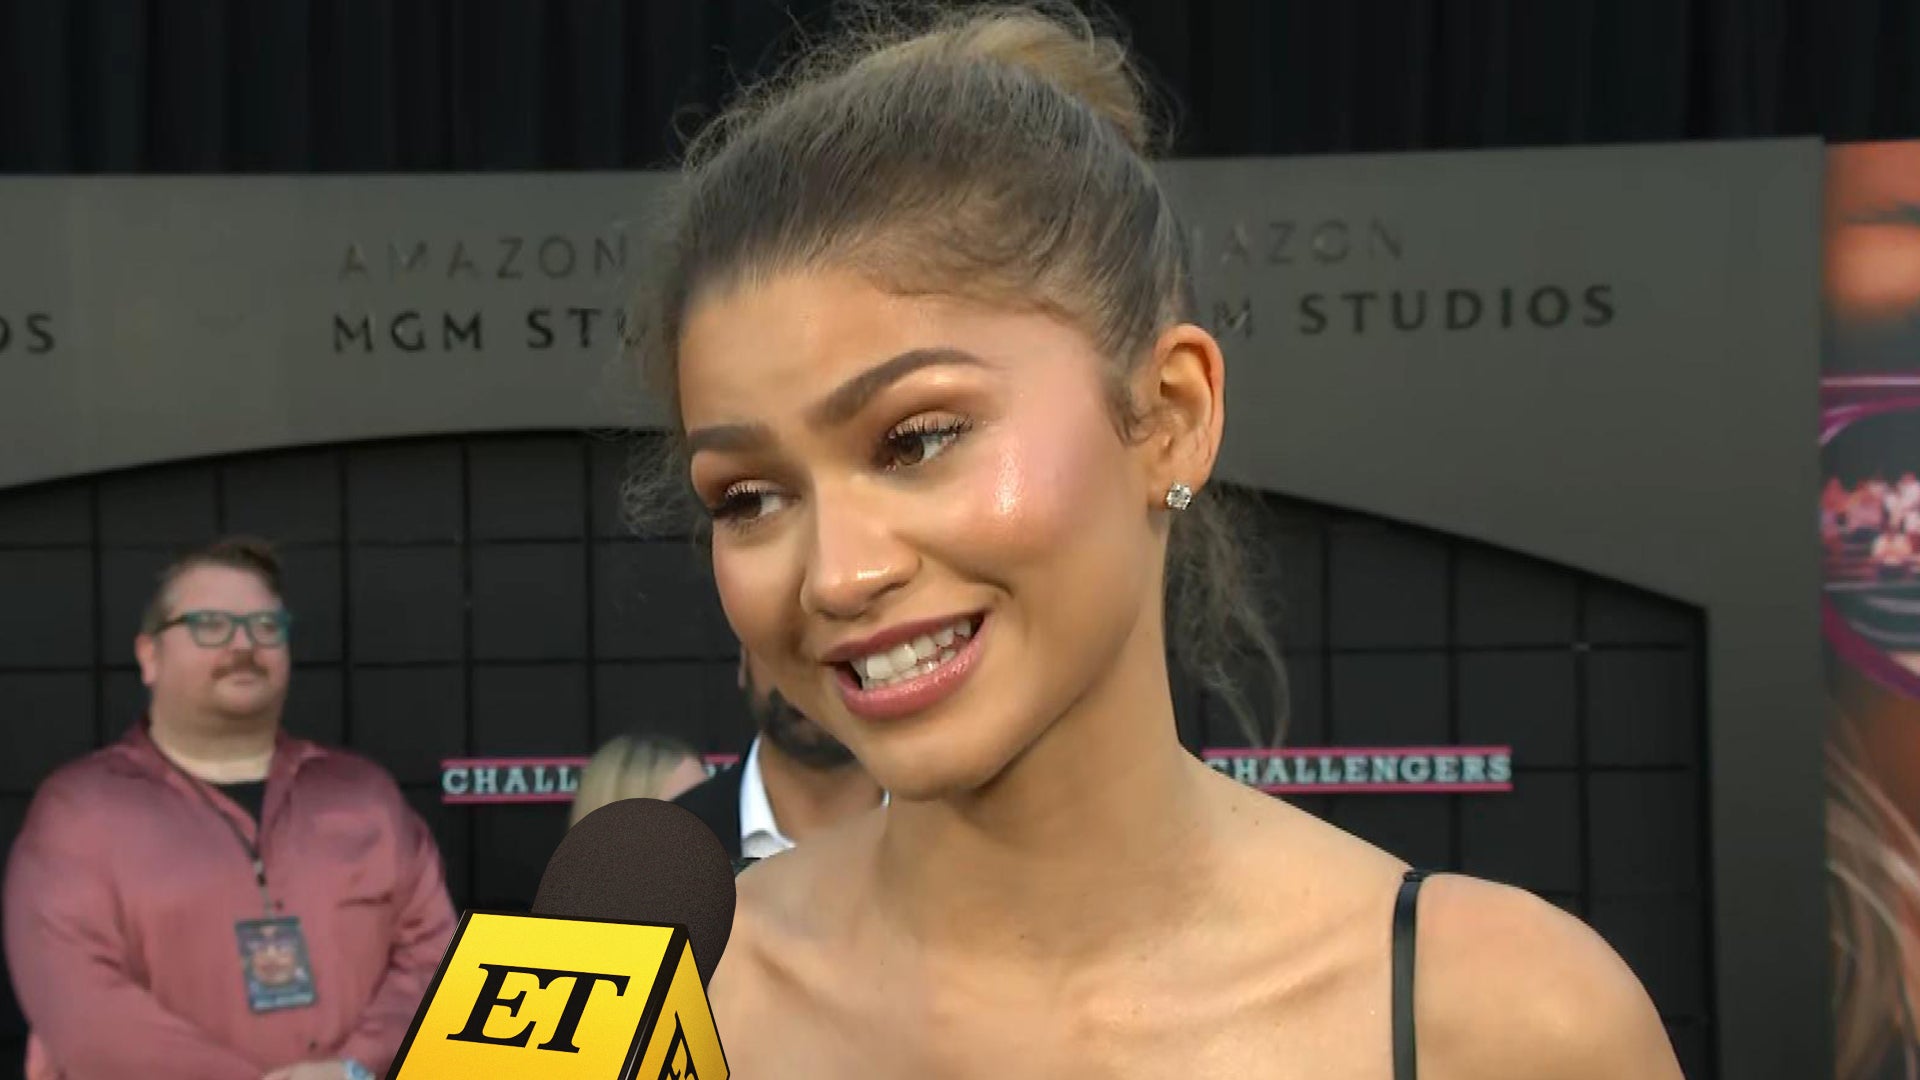 How Zendaya Feels Having Tom Holland's Support During "Challengers" Press Tour (Exclusive)